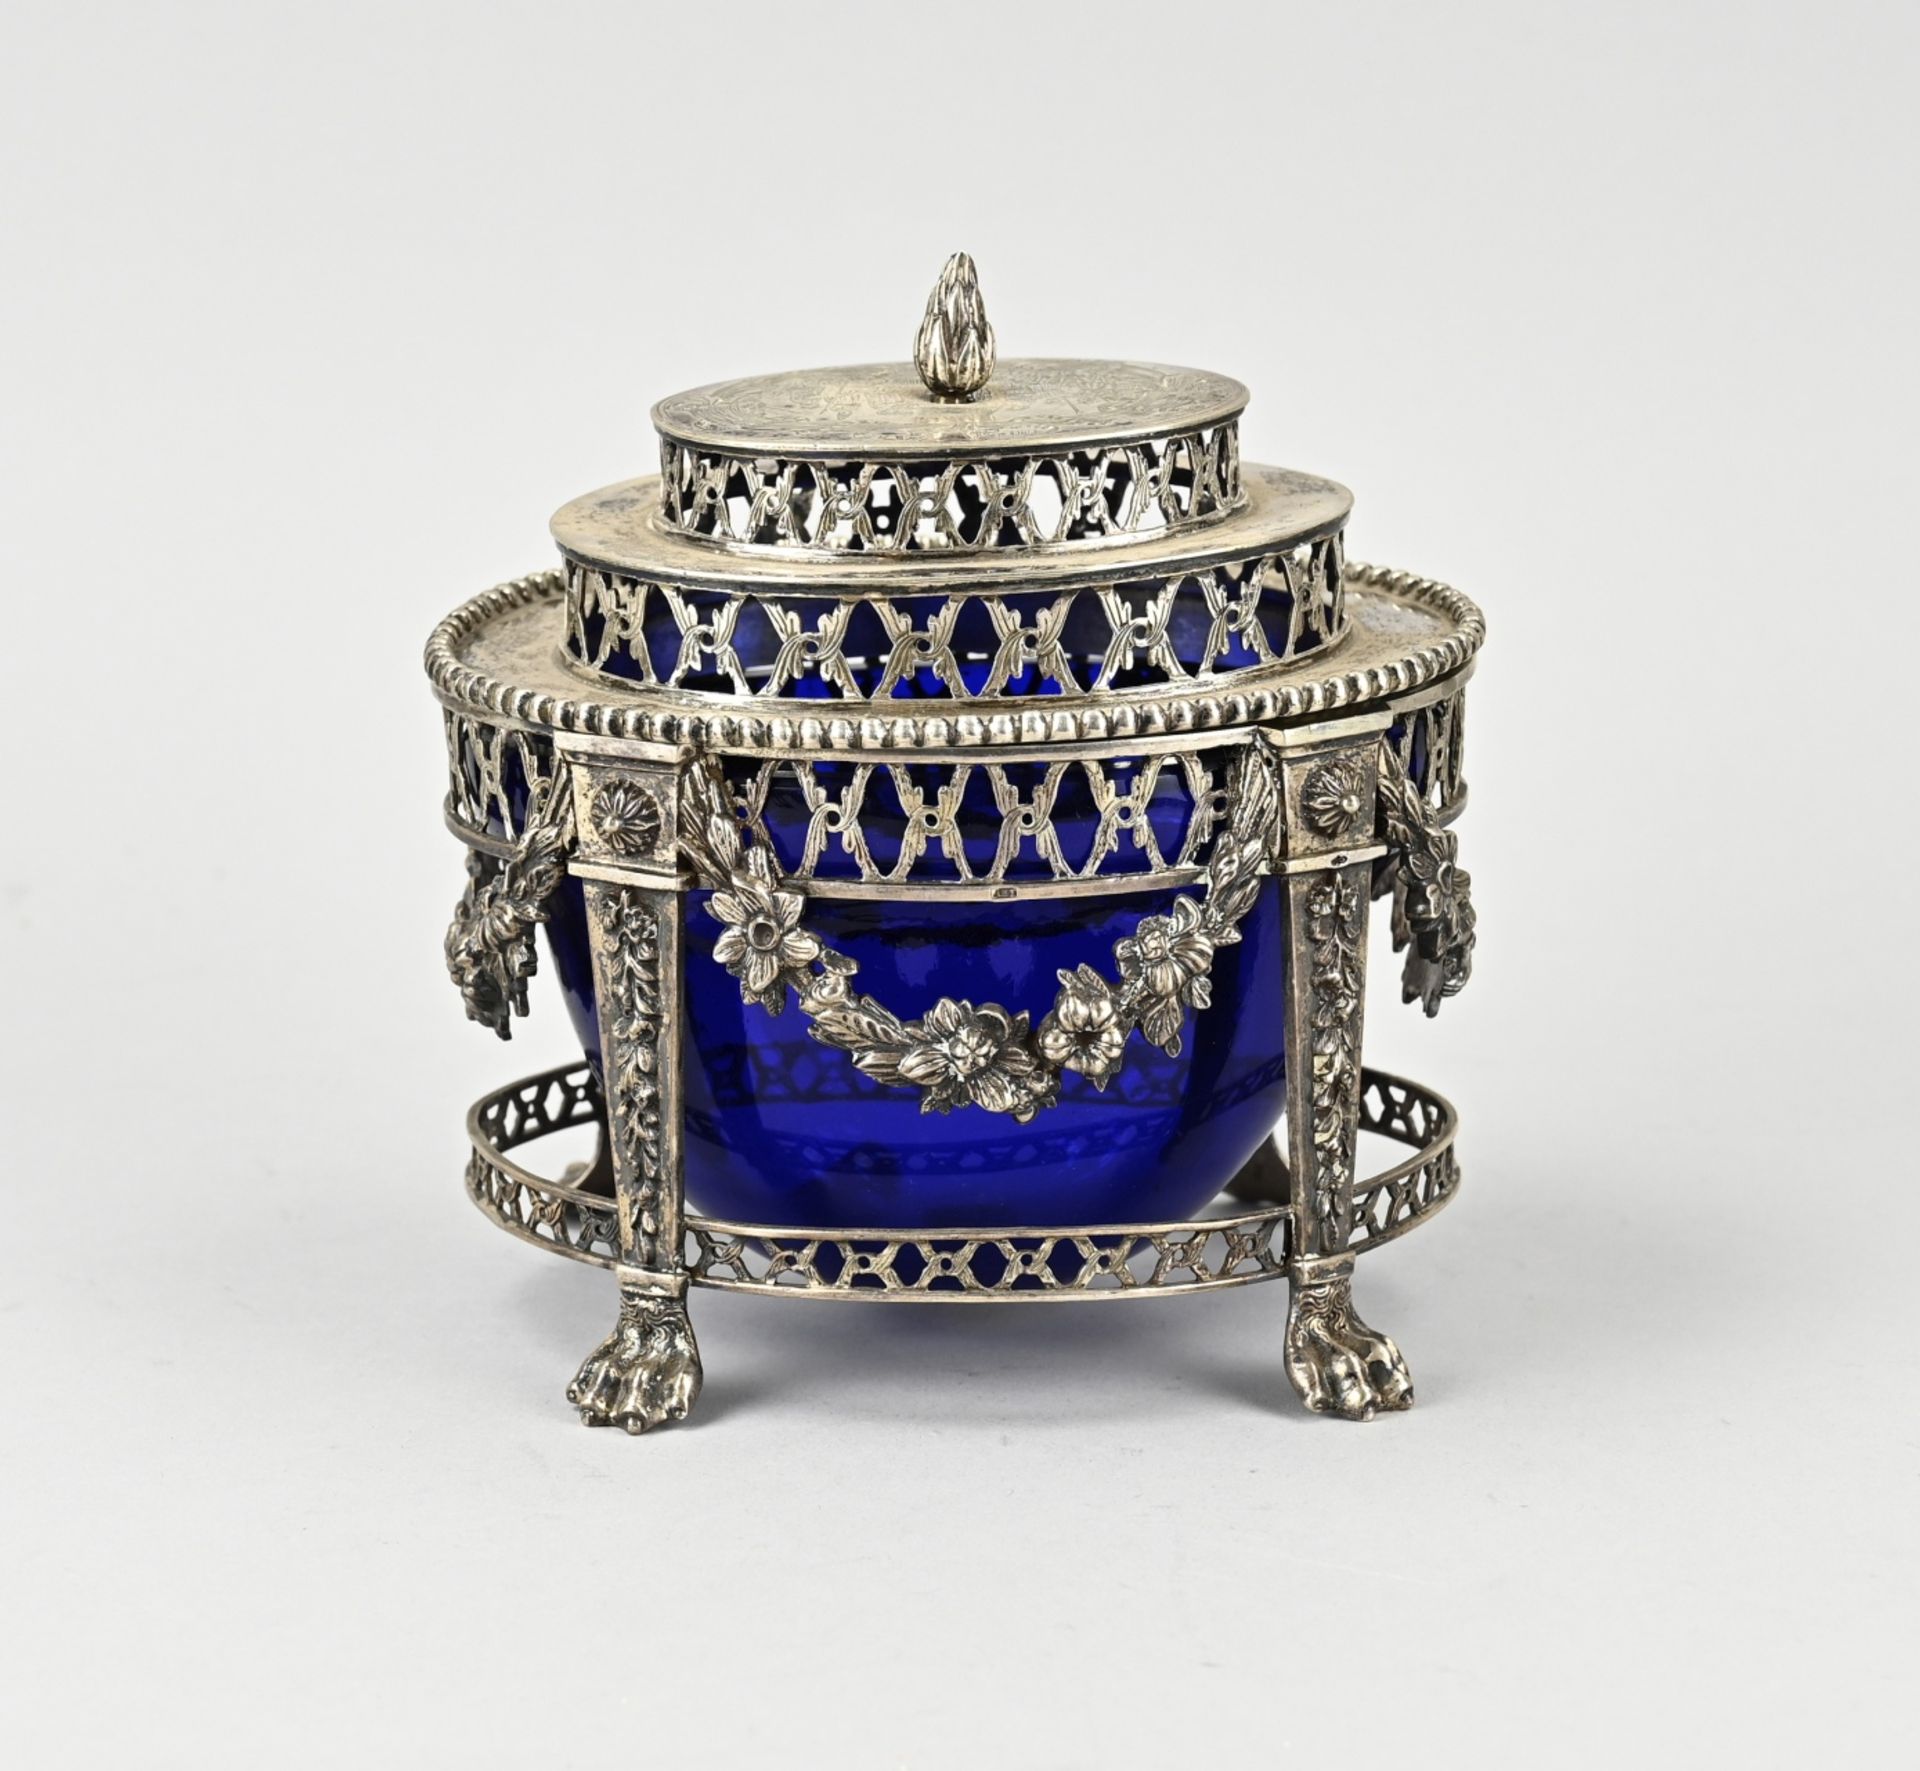 Silver box with blue glass